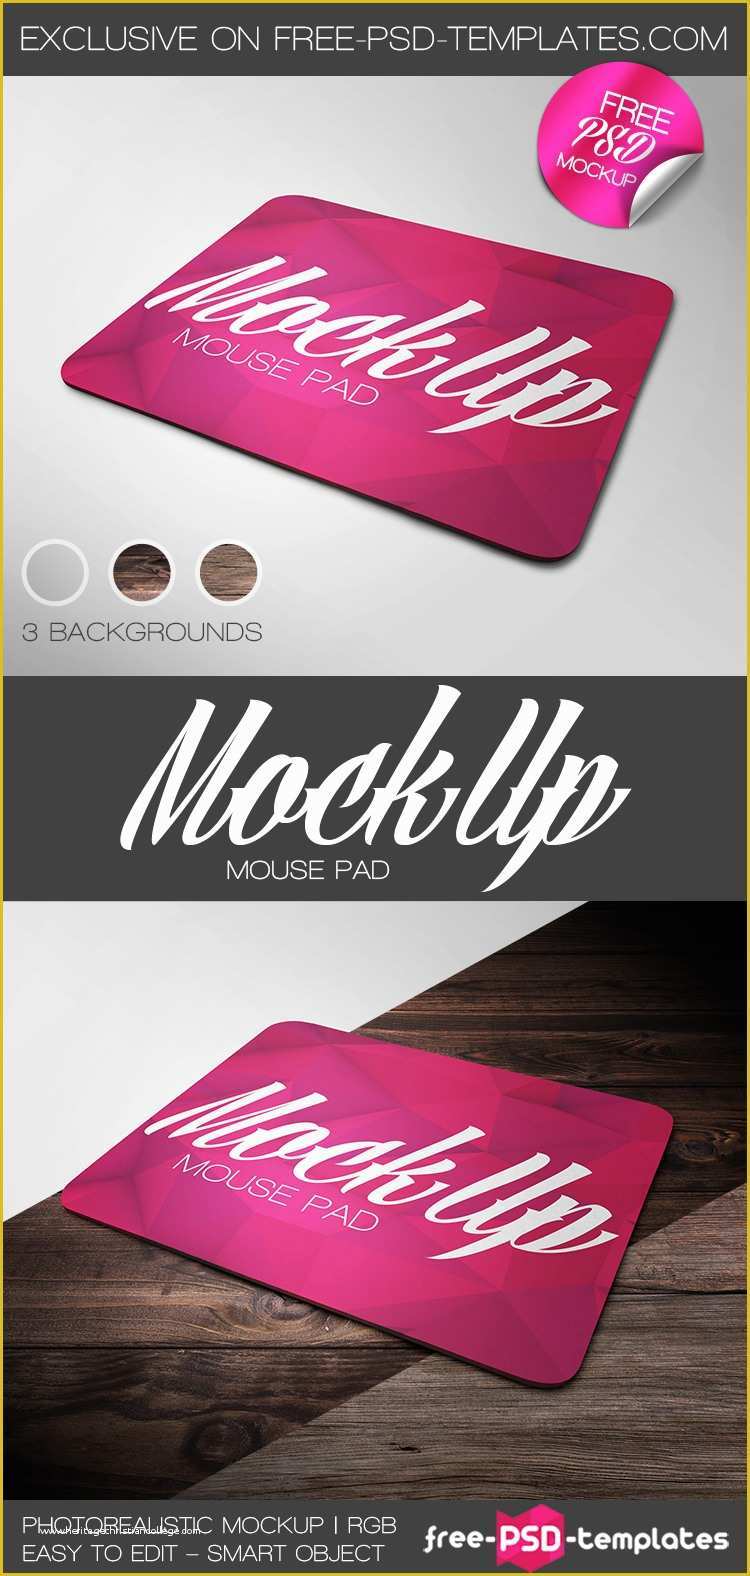 Free Psd Templates Of Free Mouse Pad Mock Up In Psd